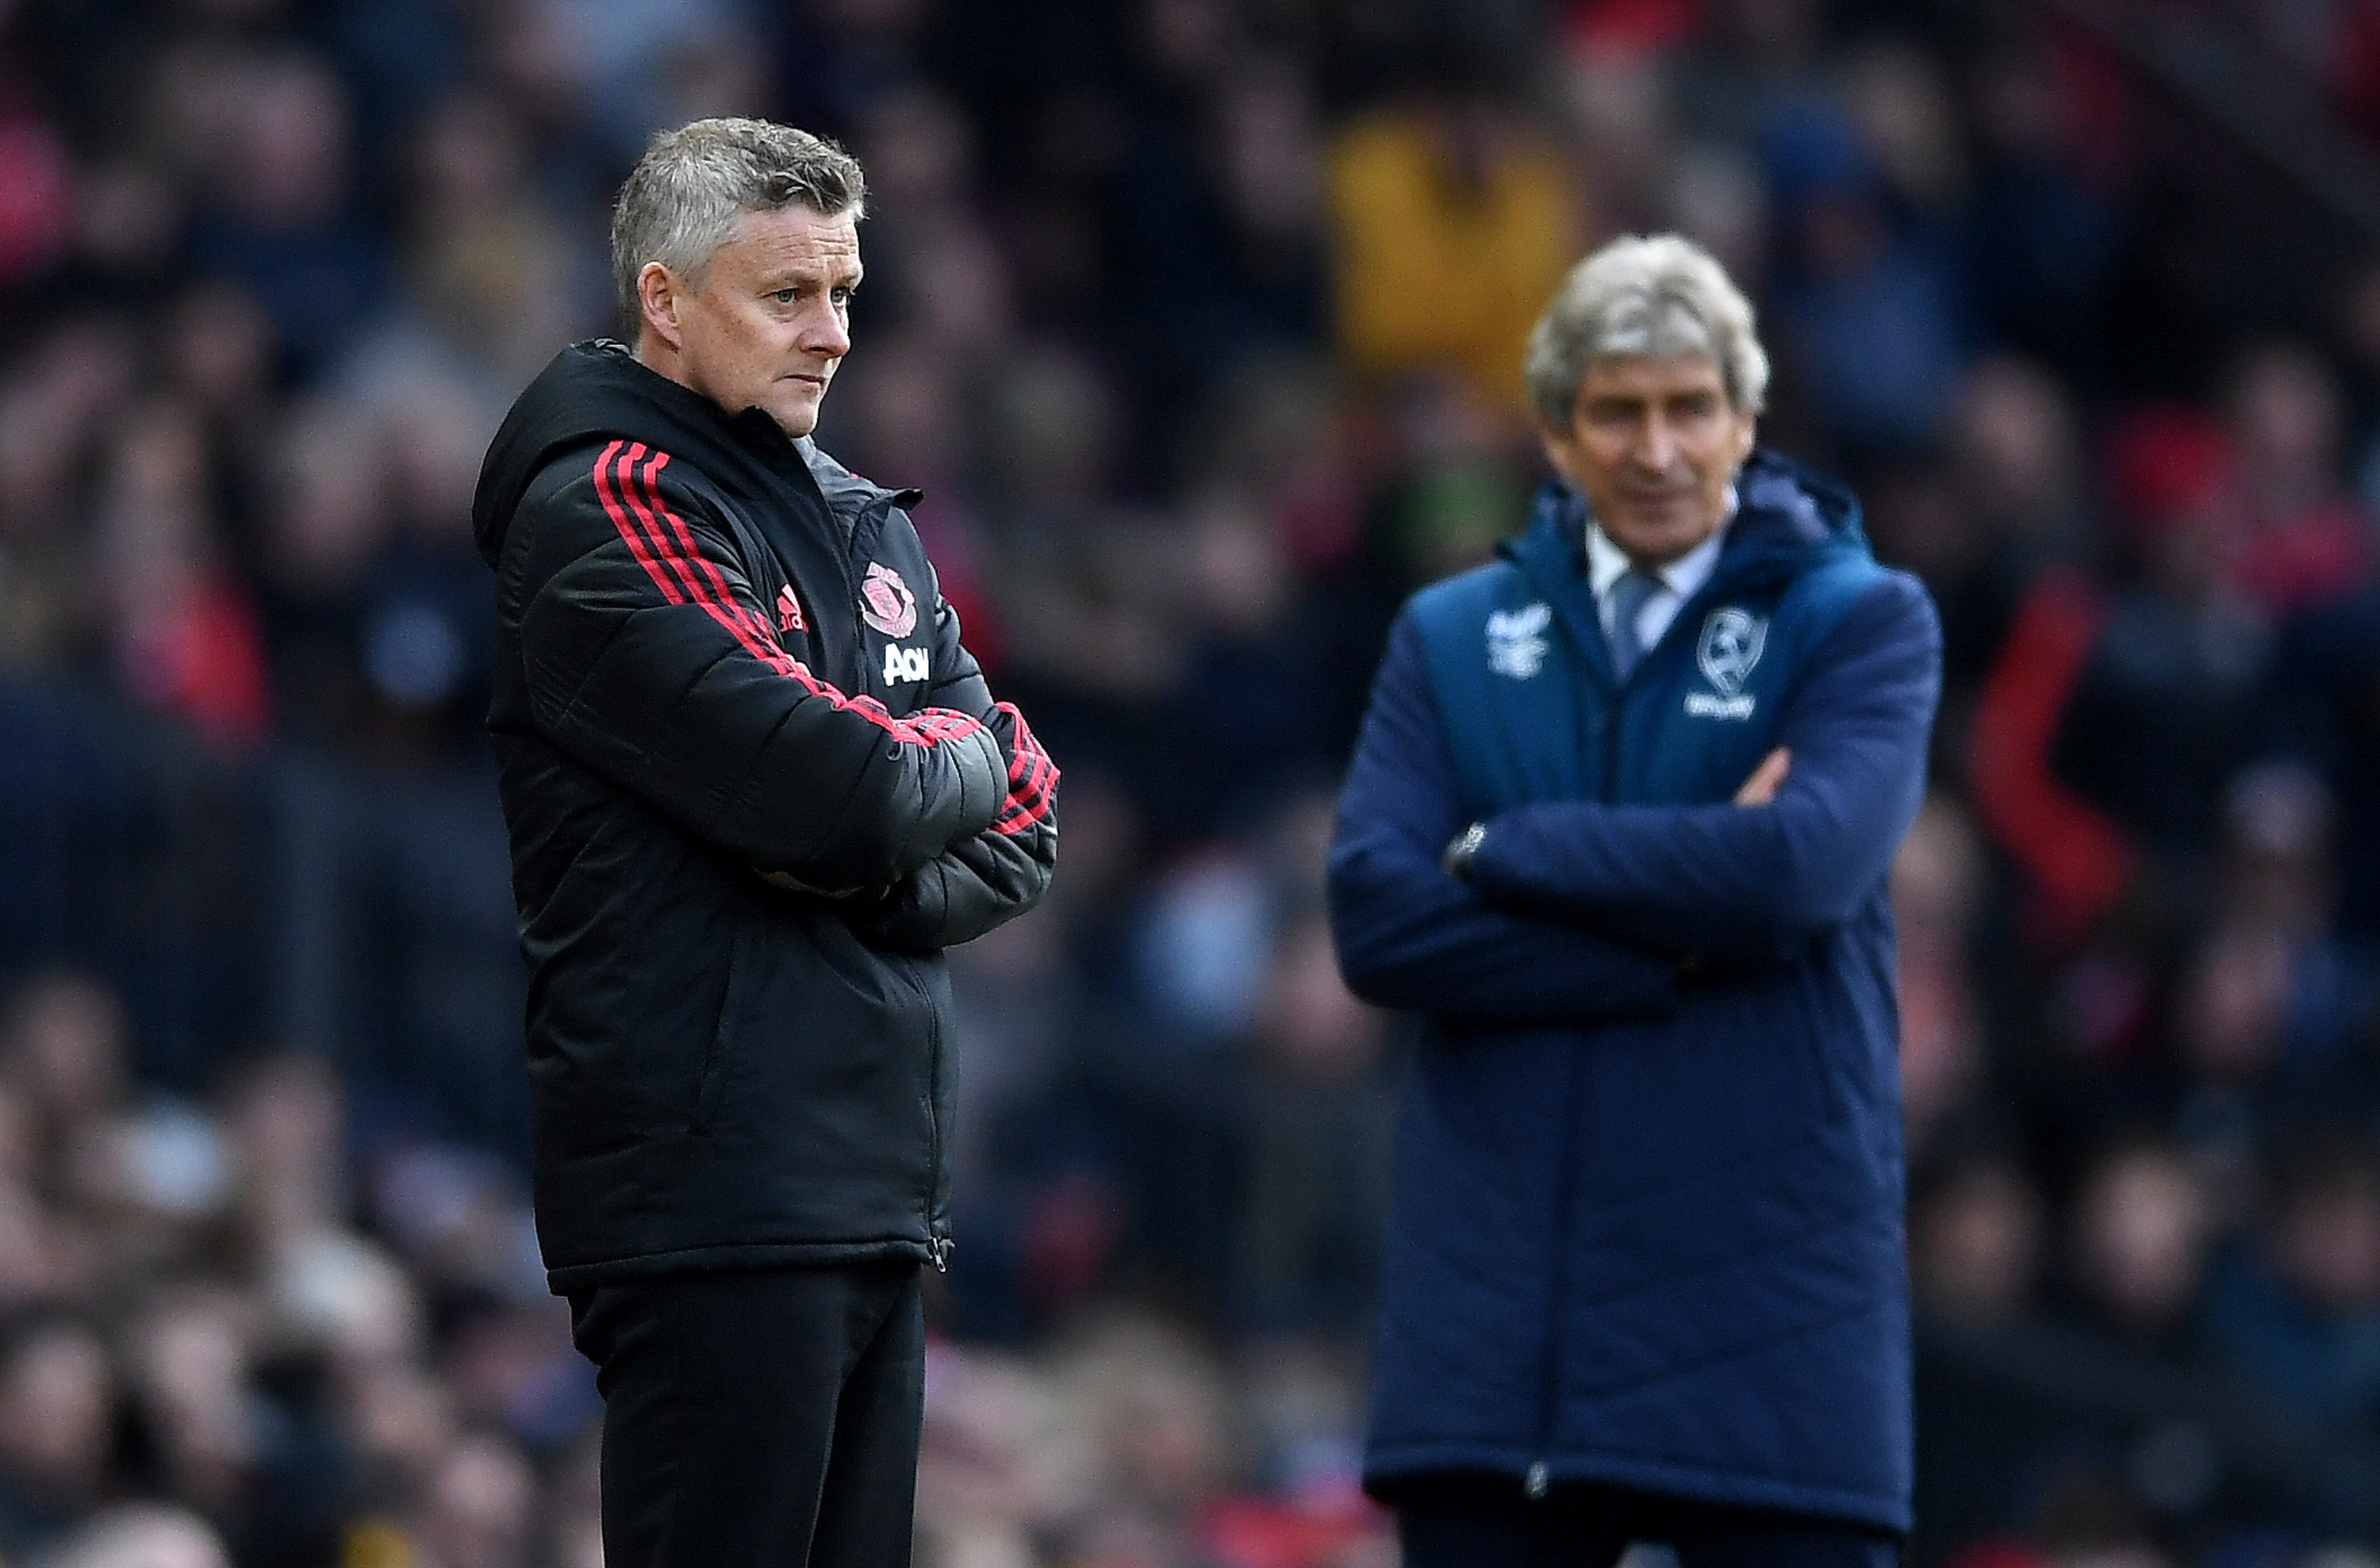 MANCHESTER, ENGLAND - APRIL 13:  Ole Gunnar Solskjaer, Manager of Manchester United and Manuel Pellegrini, Manager of West Ham United look on during the Premier League match between Manchester United and West Ham United at Old Trafford on April 13, 2019 in Manchester, United Kingdom. (Photo by Gareth Copley/Getty Images)